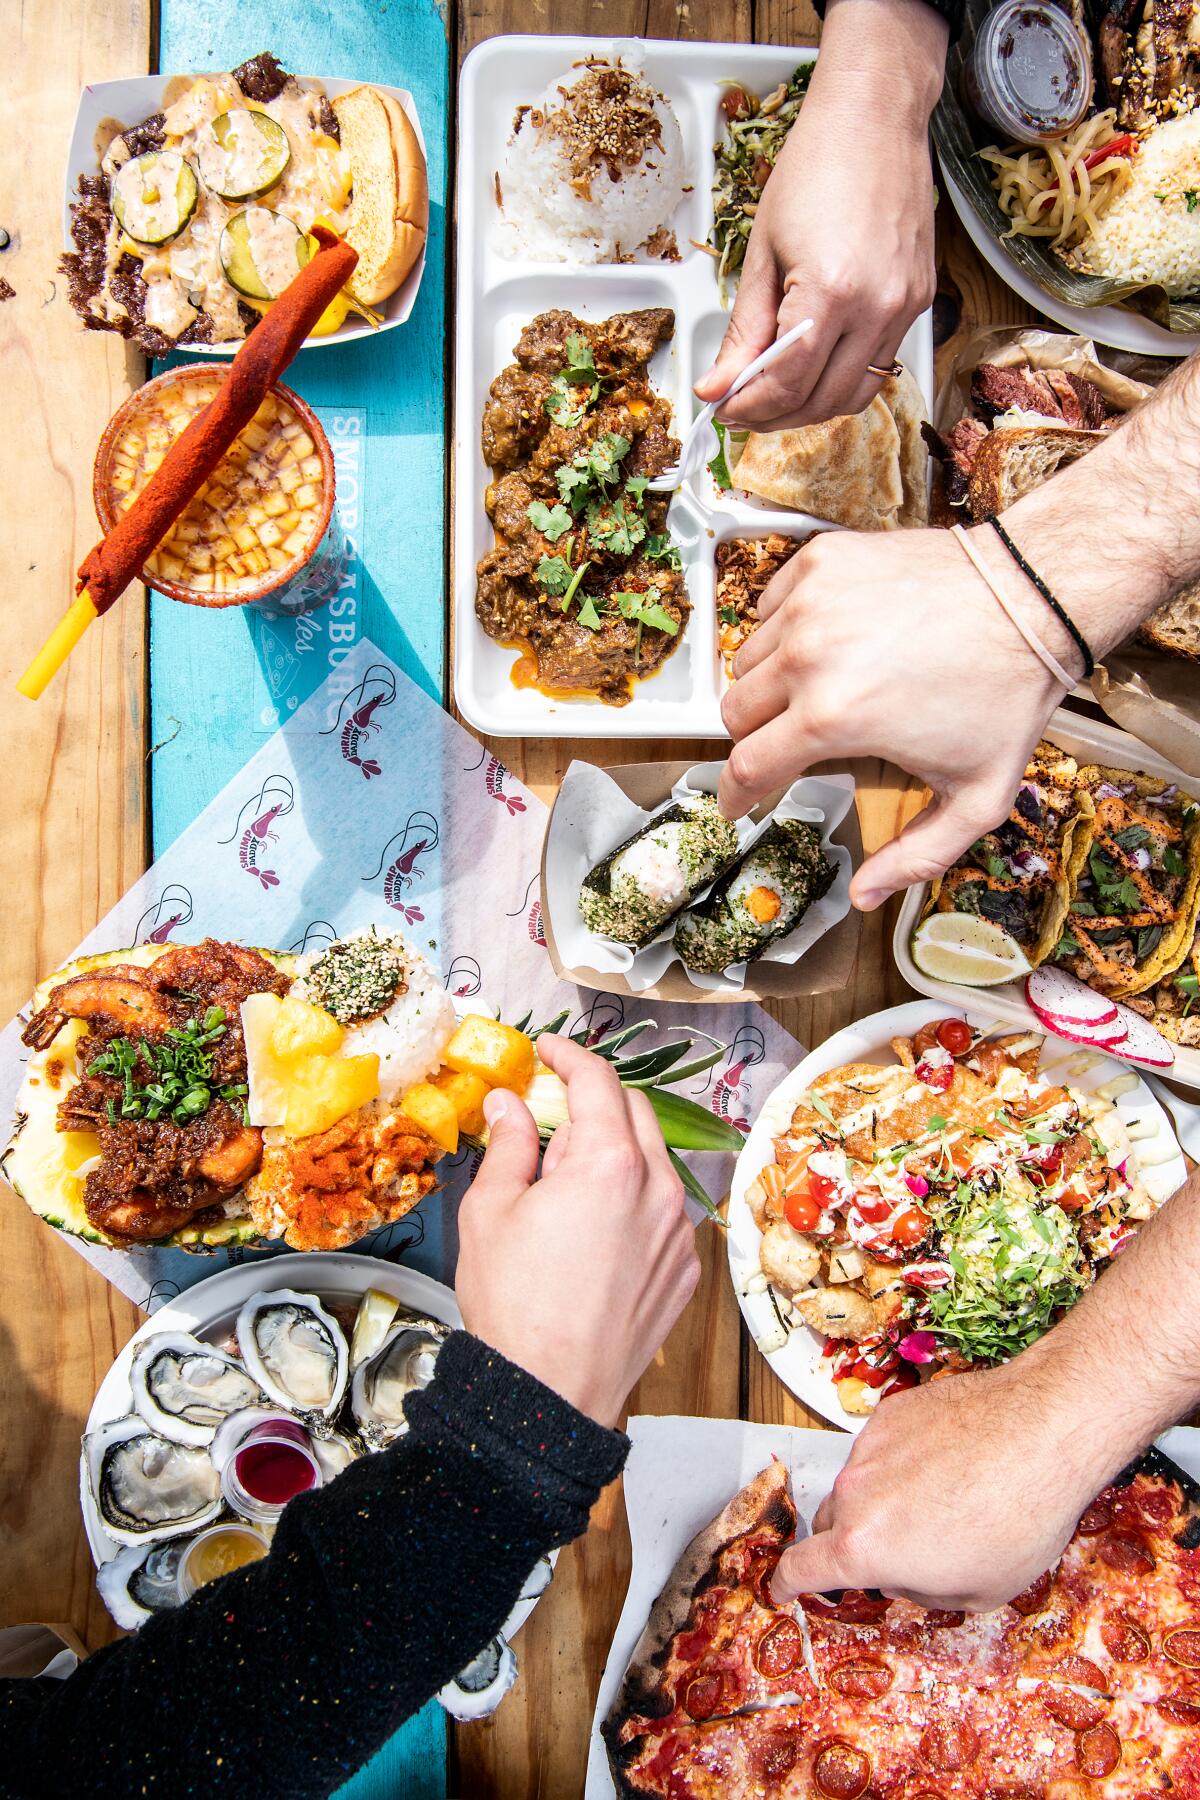 Hands reaching in to share a variety of dishes on a table.